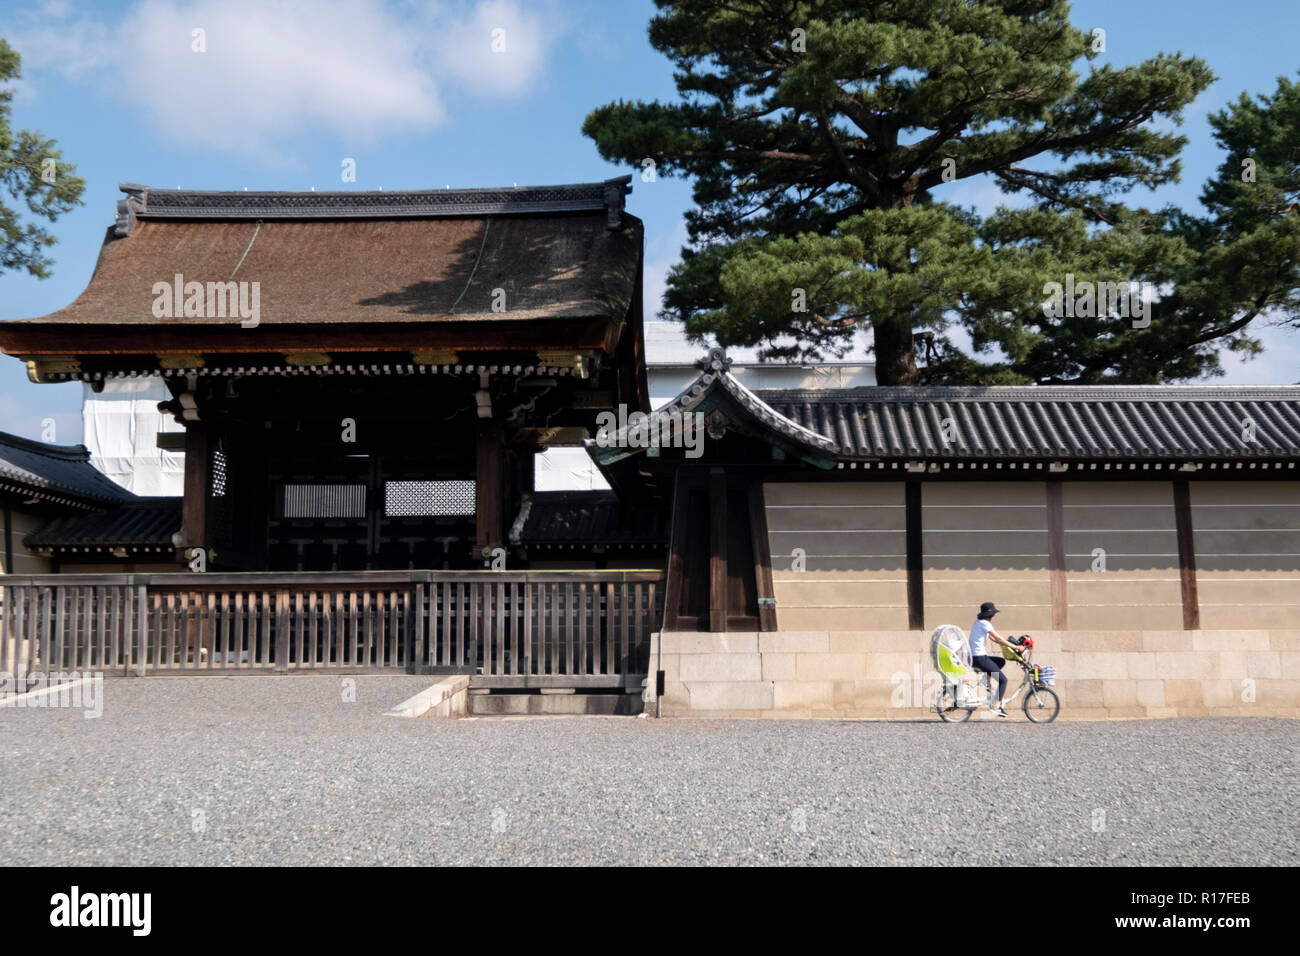 Cyclists outside the gates of the imperial palace in Kyoto, Japan Stock Photo